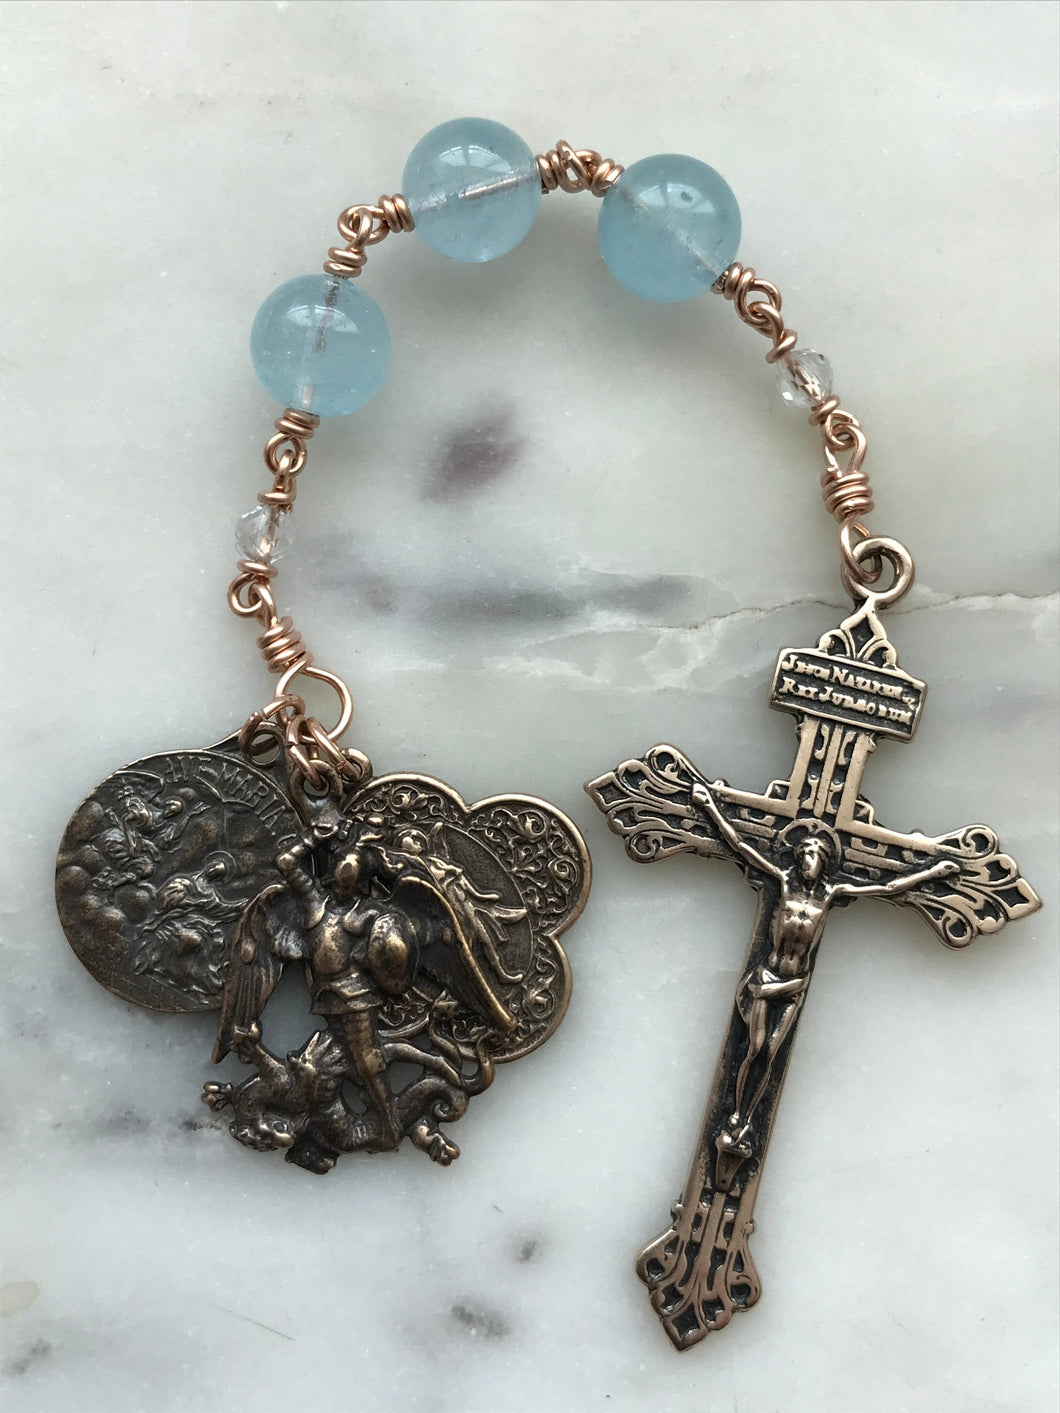 Three Hail Mary Rosary - Angels - Blue Topaz and Bronze - Archangels Rosary - Michael, Gabriel, Raphael